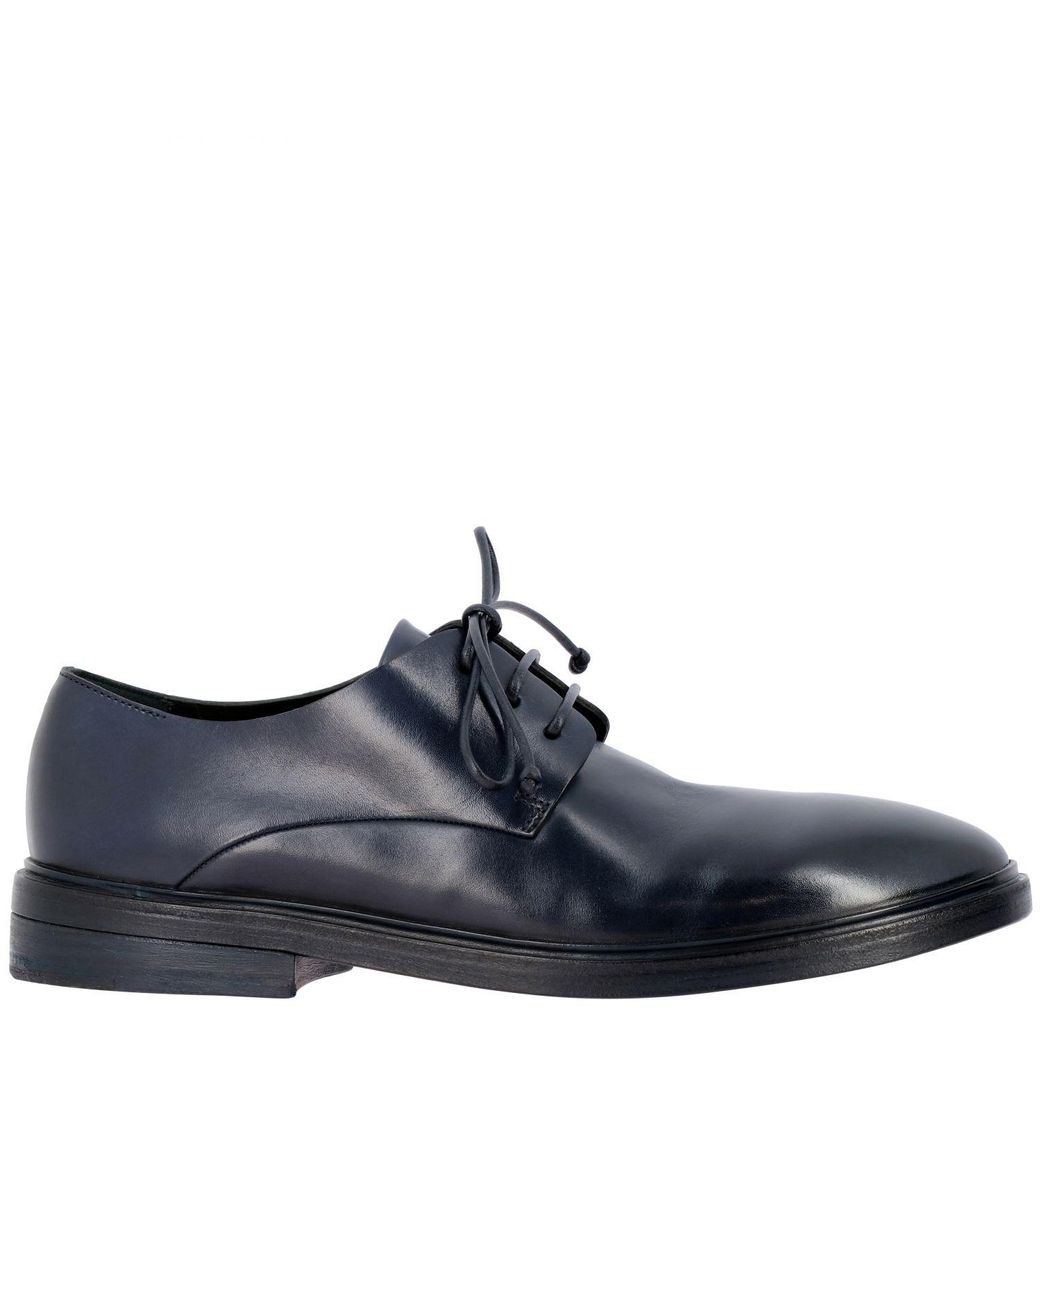 Marsèll Leather Brogue Shoes in Blue for Men - Lyst